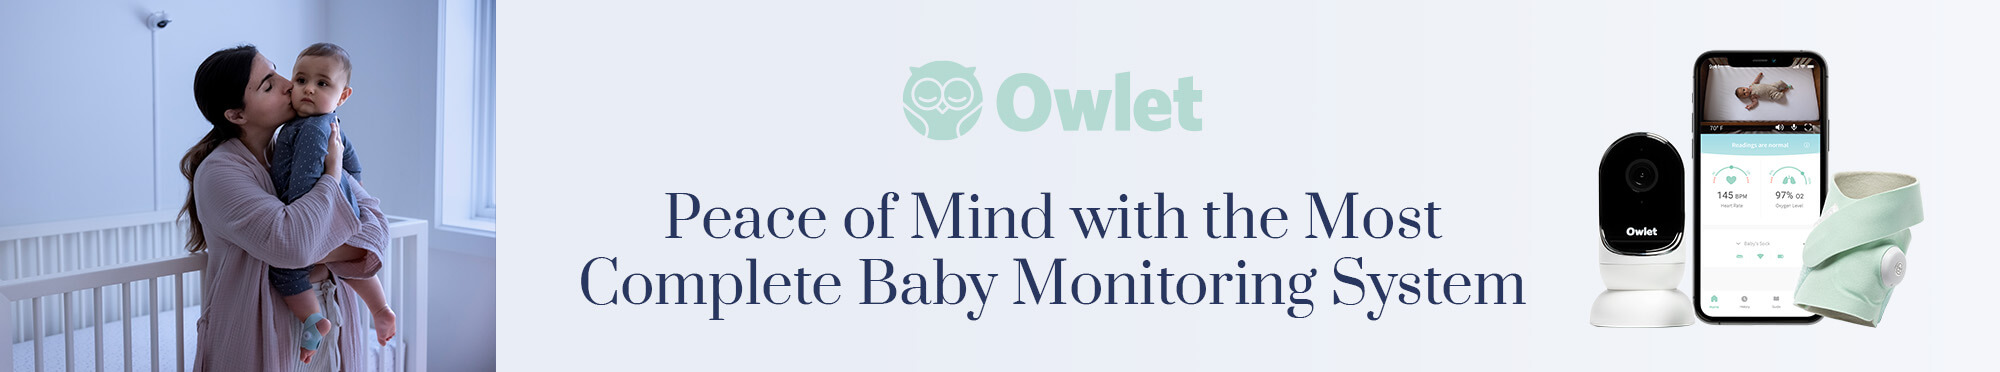 Owlet baby monitoring system mama disrupt advertisement